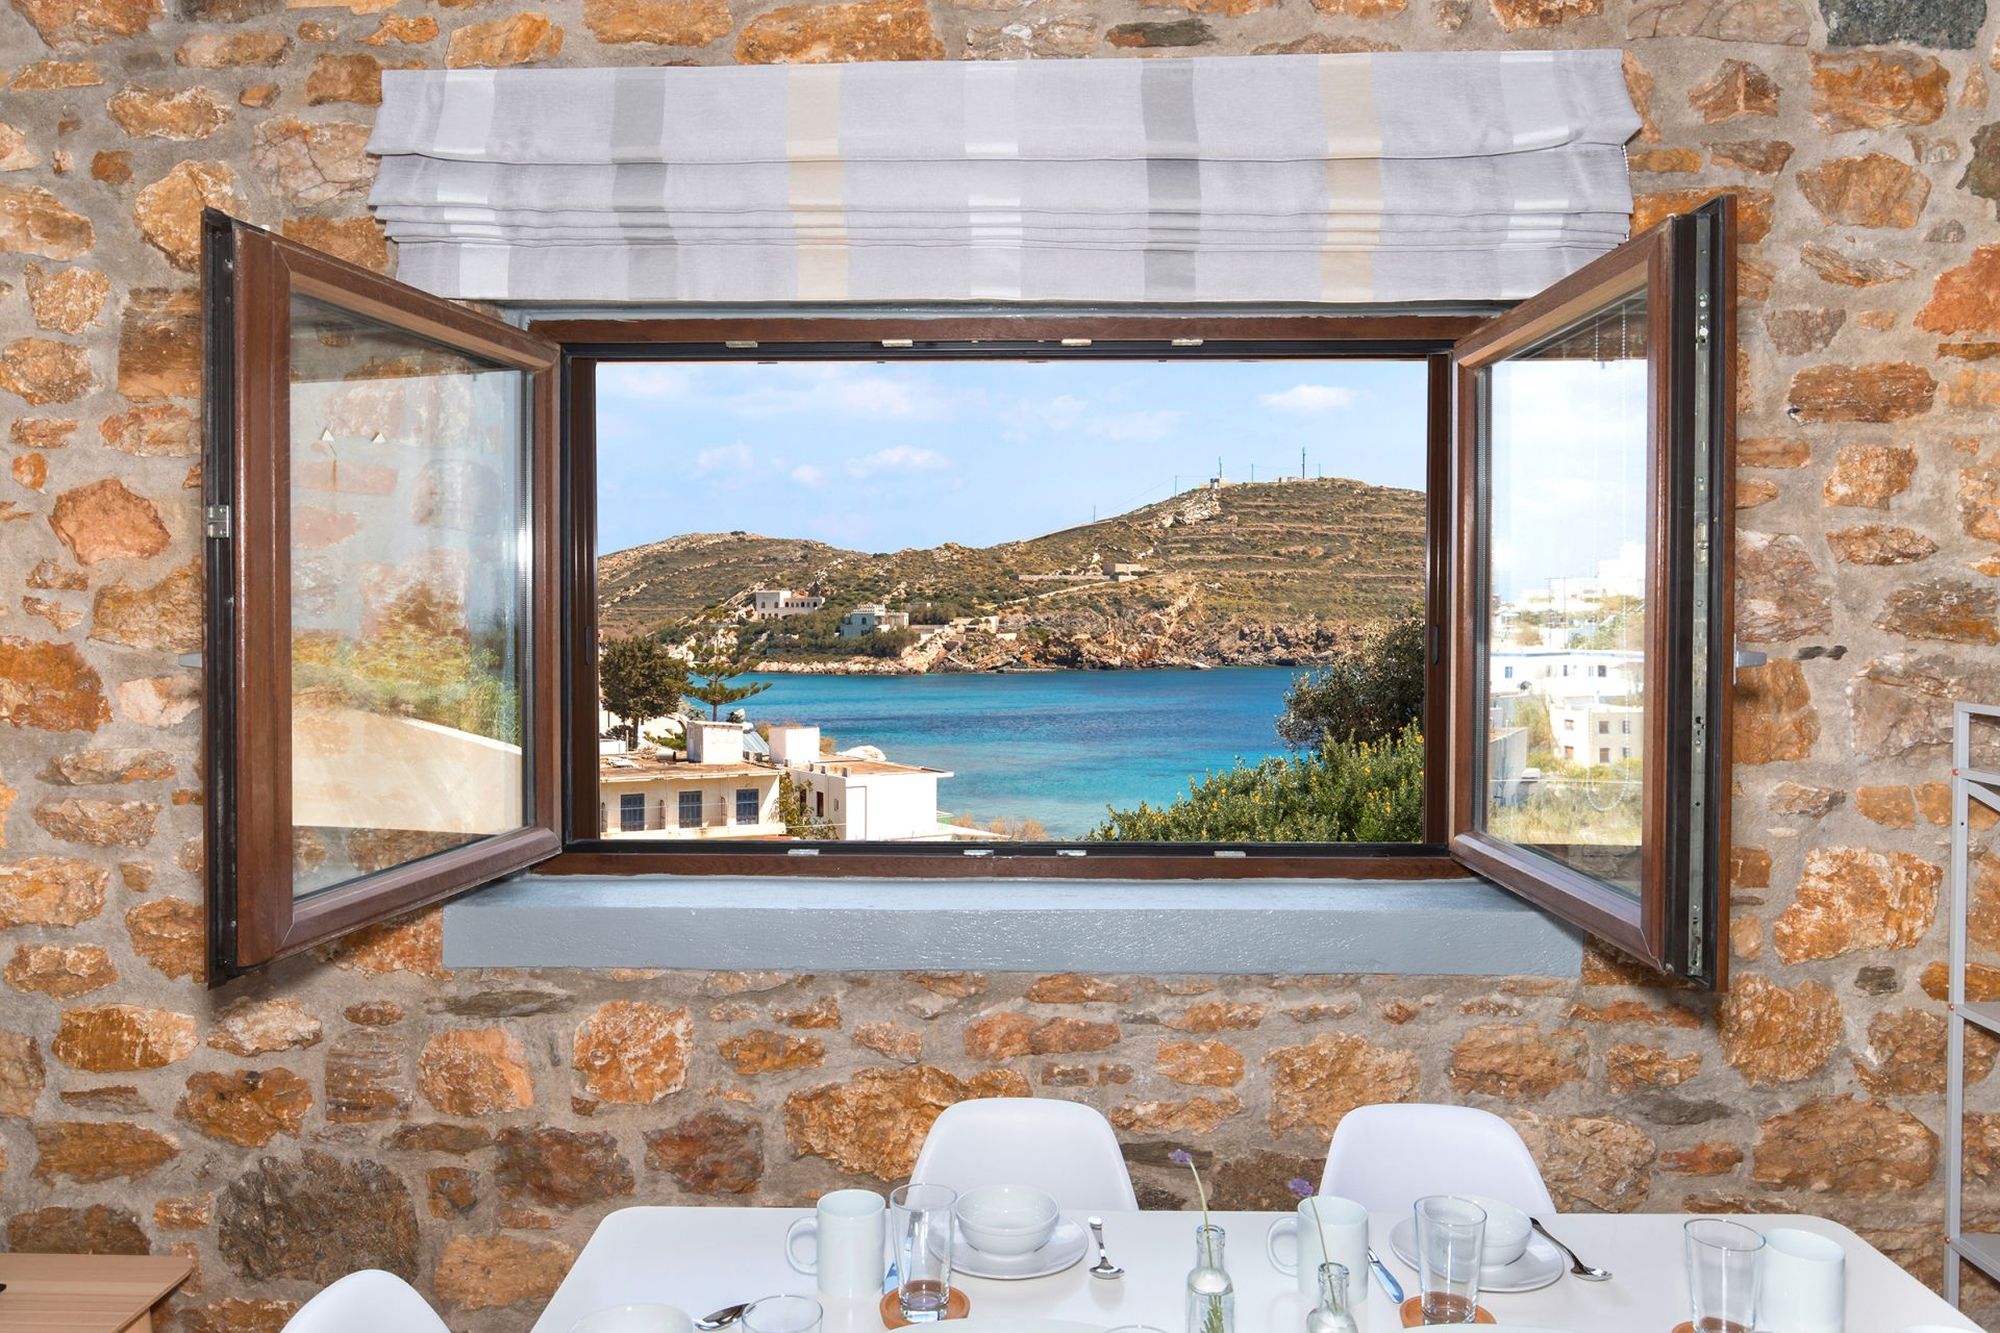 Sea view from the window of a stone built Syra Suite residence.